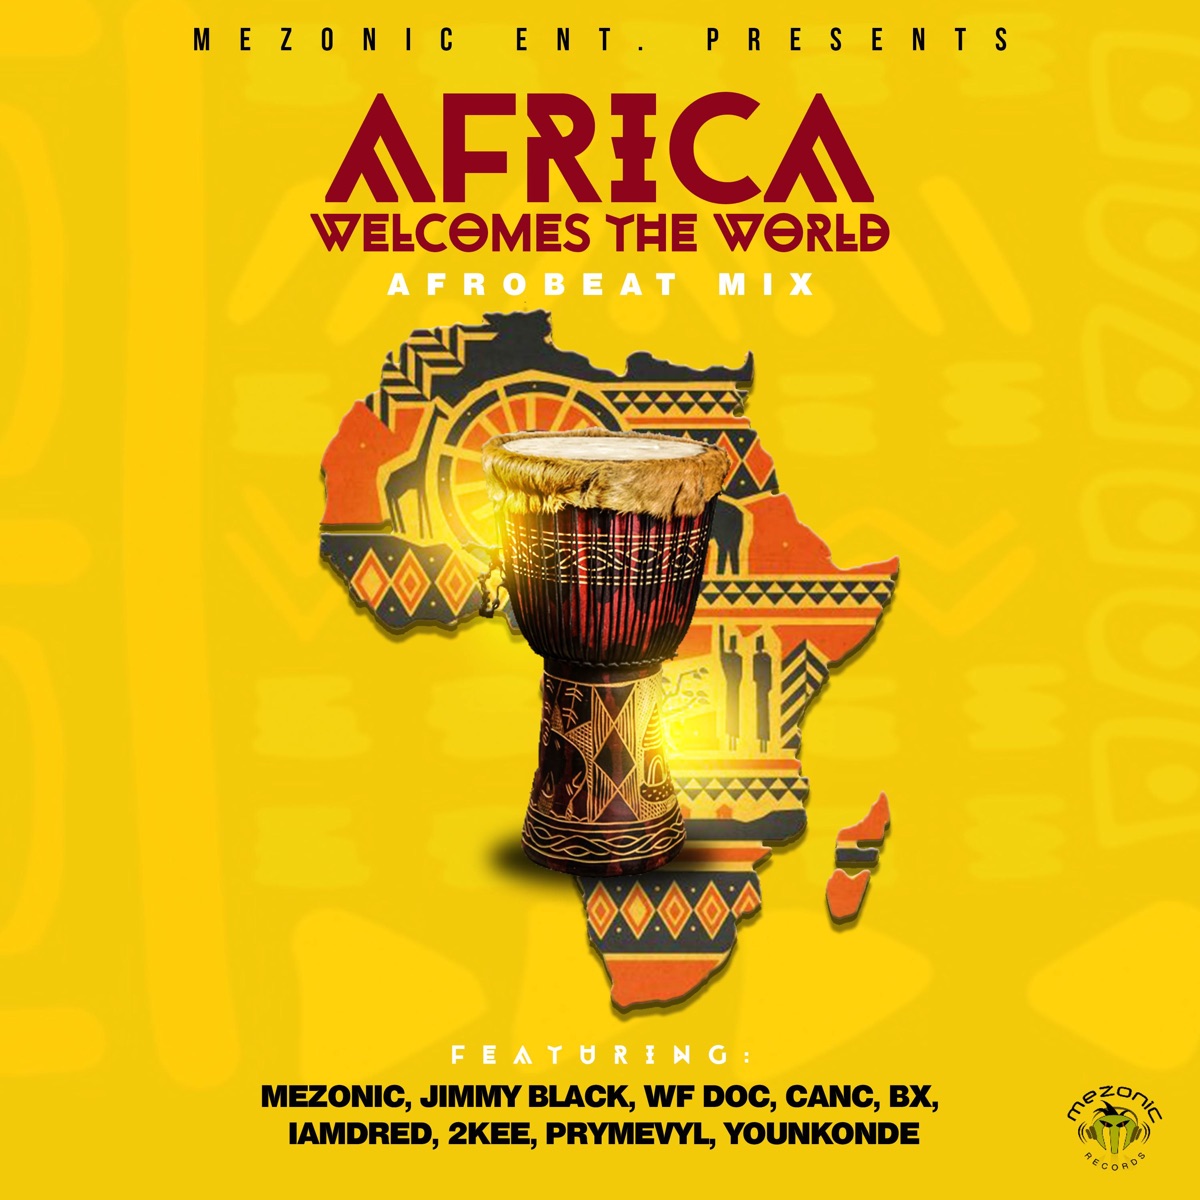 Africa Welcomes the World (Afrobeat Mix) - Album by Mezonic - Apple Music